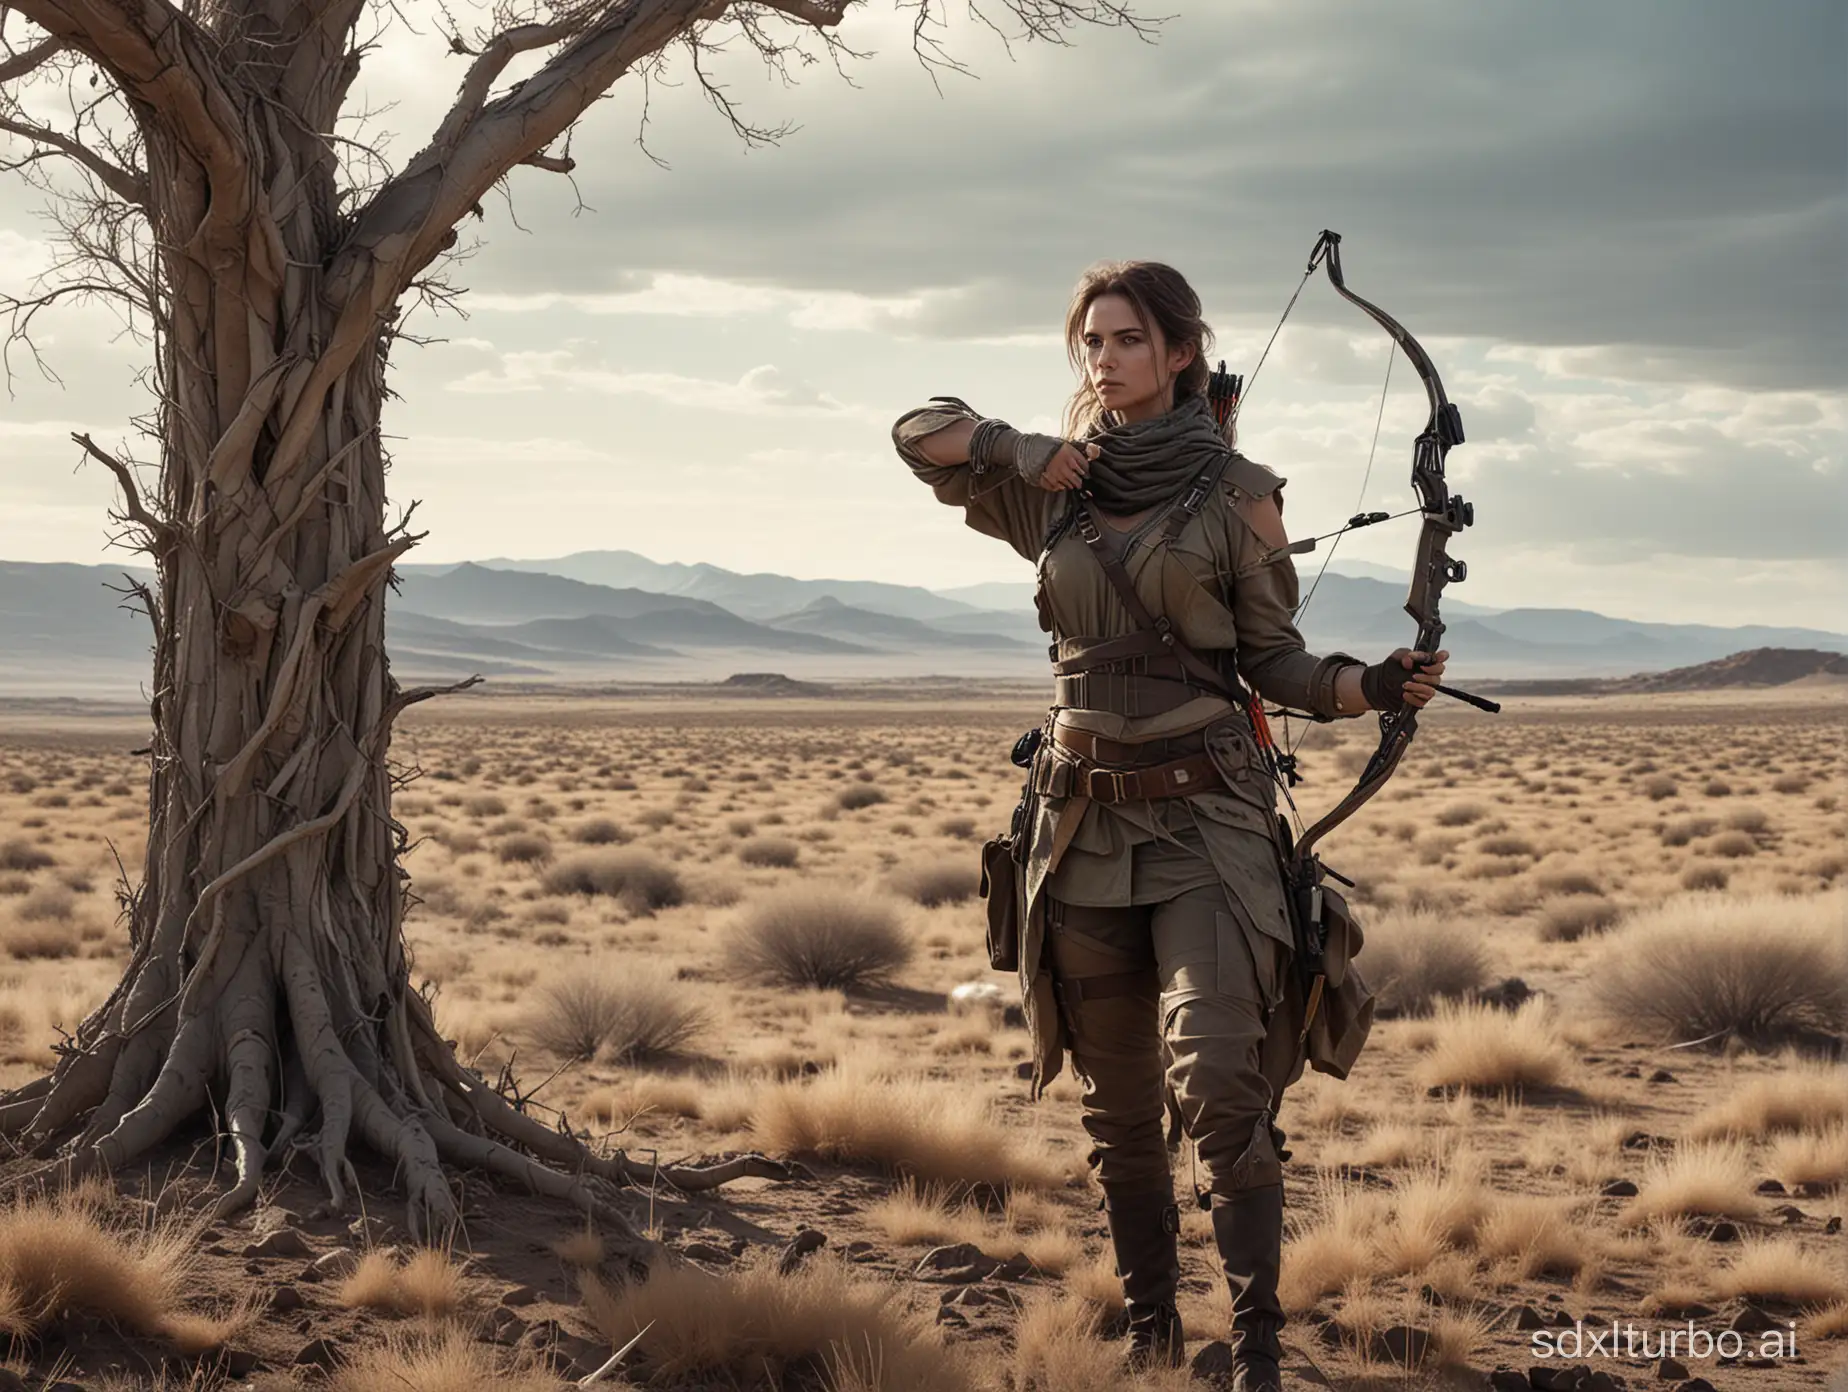 Create a digital art piece that shows a stunning woman in a camouflaged wasteland outfit, hiding behind a tree with a compound bow in her hands. She is in a desolate landscape that appears to have once been a beautiful natural place, but is now a wasteland. Despite the desolation, there is a sense of resilience and strength emanating from her. The woman should have an aura of mystery and agility, ready to spring into action. The landscape should have a wide aspect ratio to capture the vastness of the wasteland.